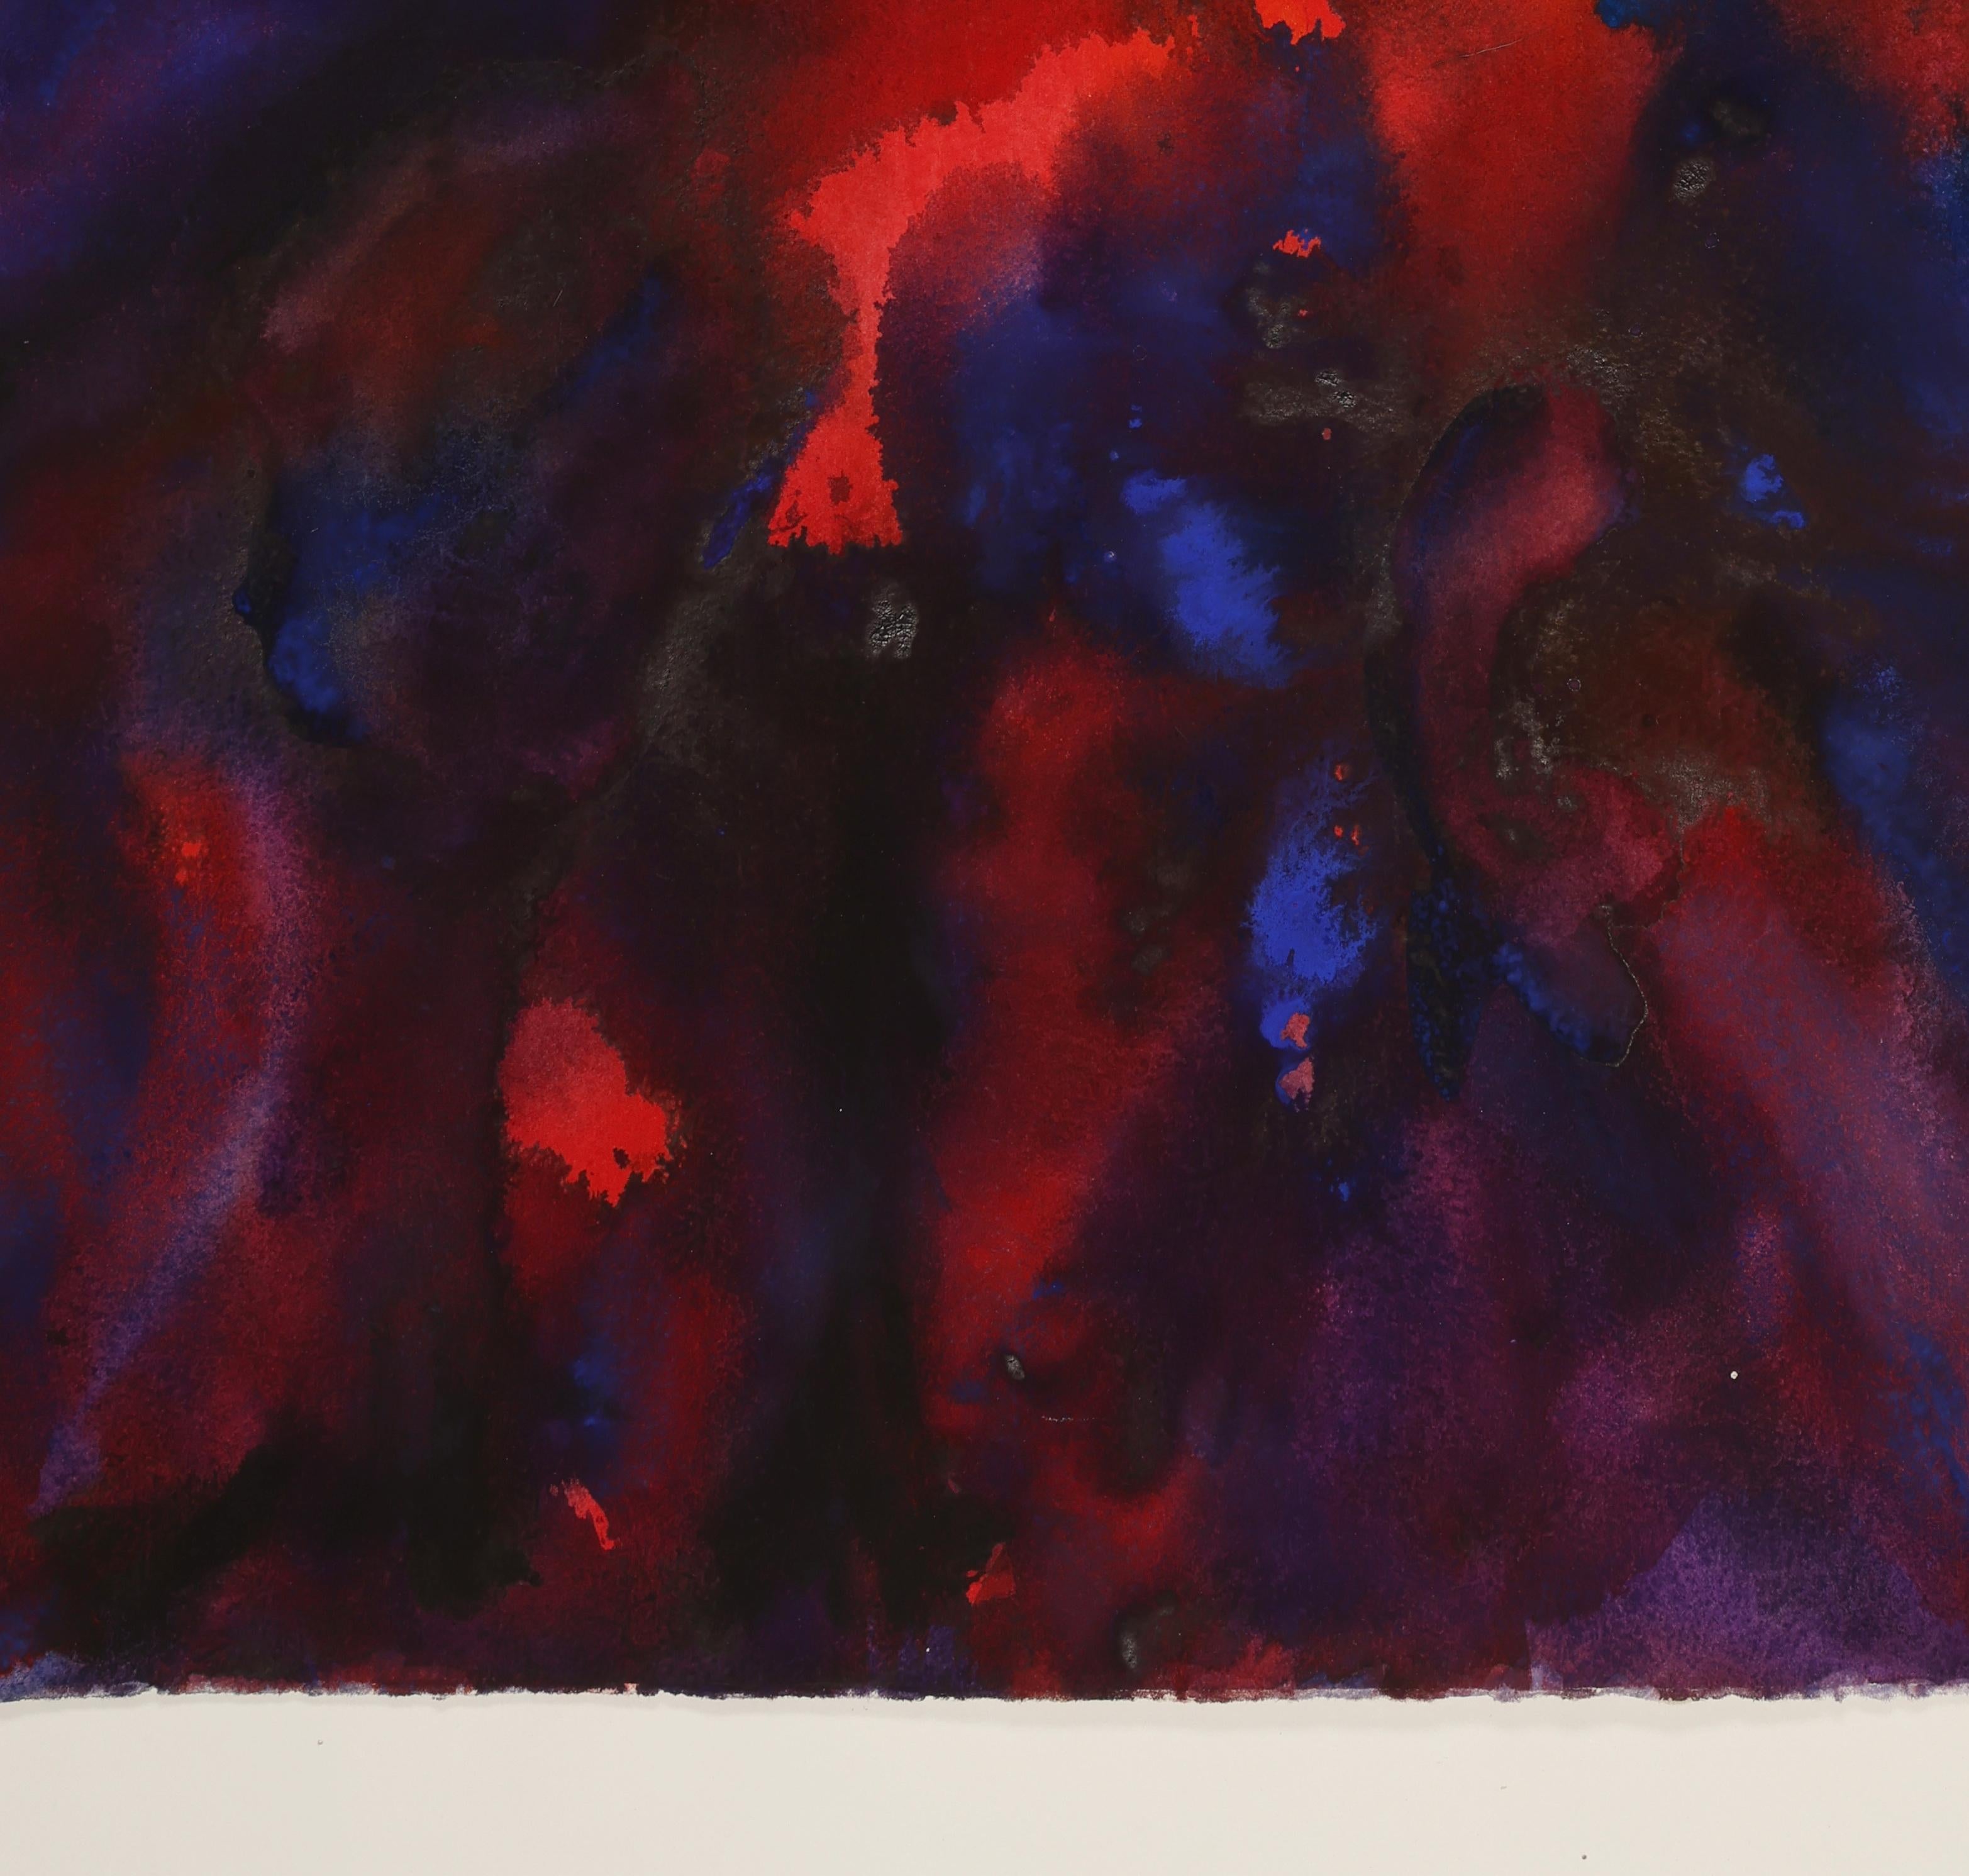 Abstract Watercolor Painting, 'Design for Light', c. 2000 by David Ruth For Sale 1